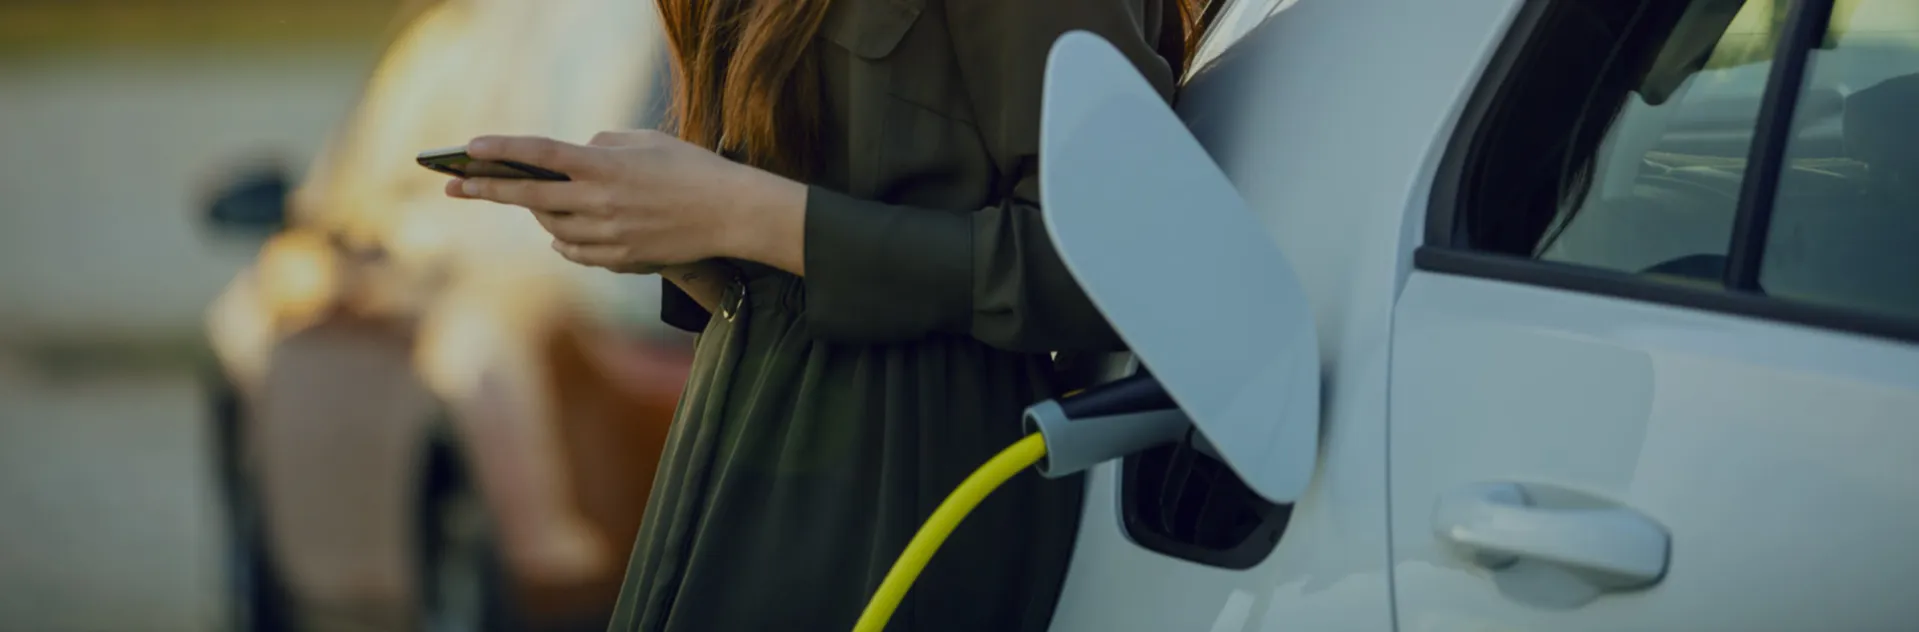 Woman on her phone next to an electric car charging